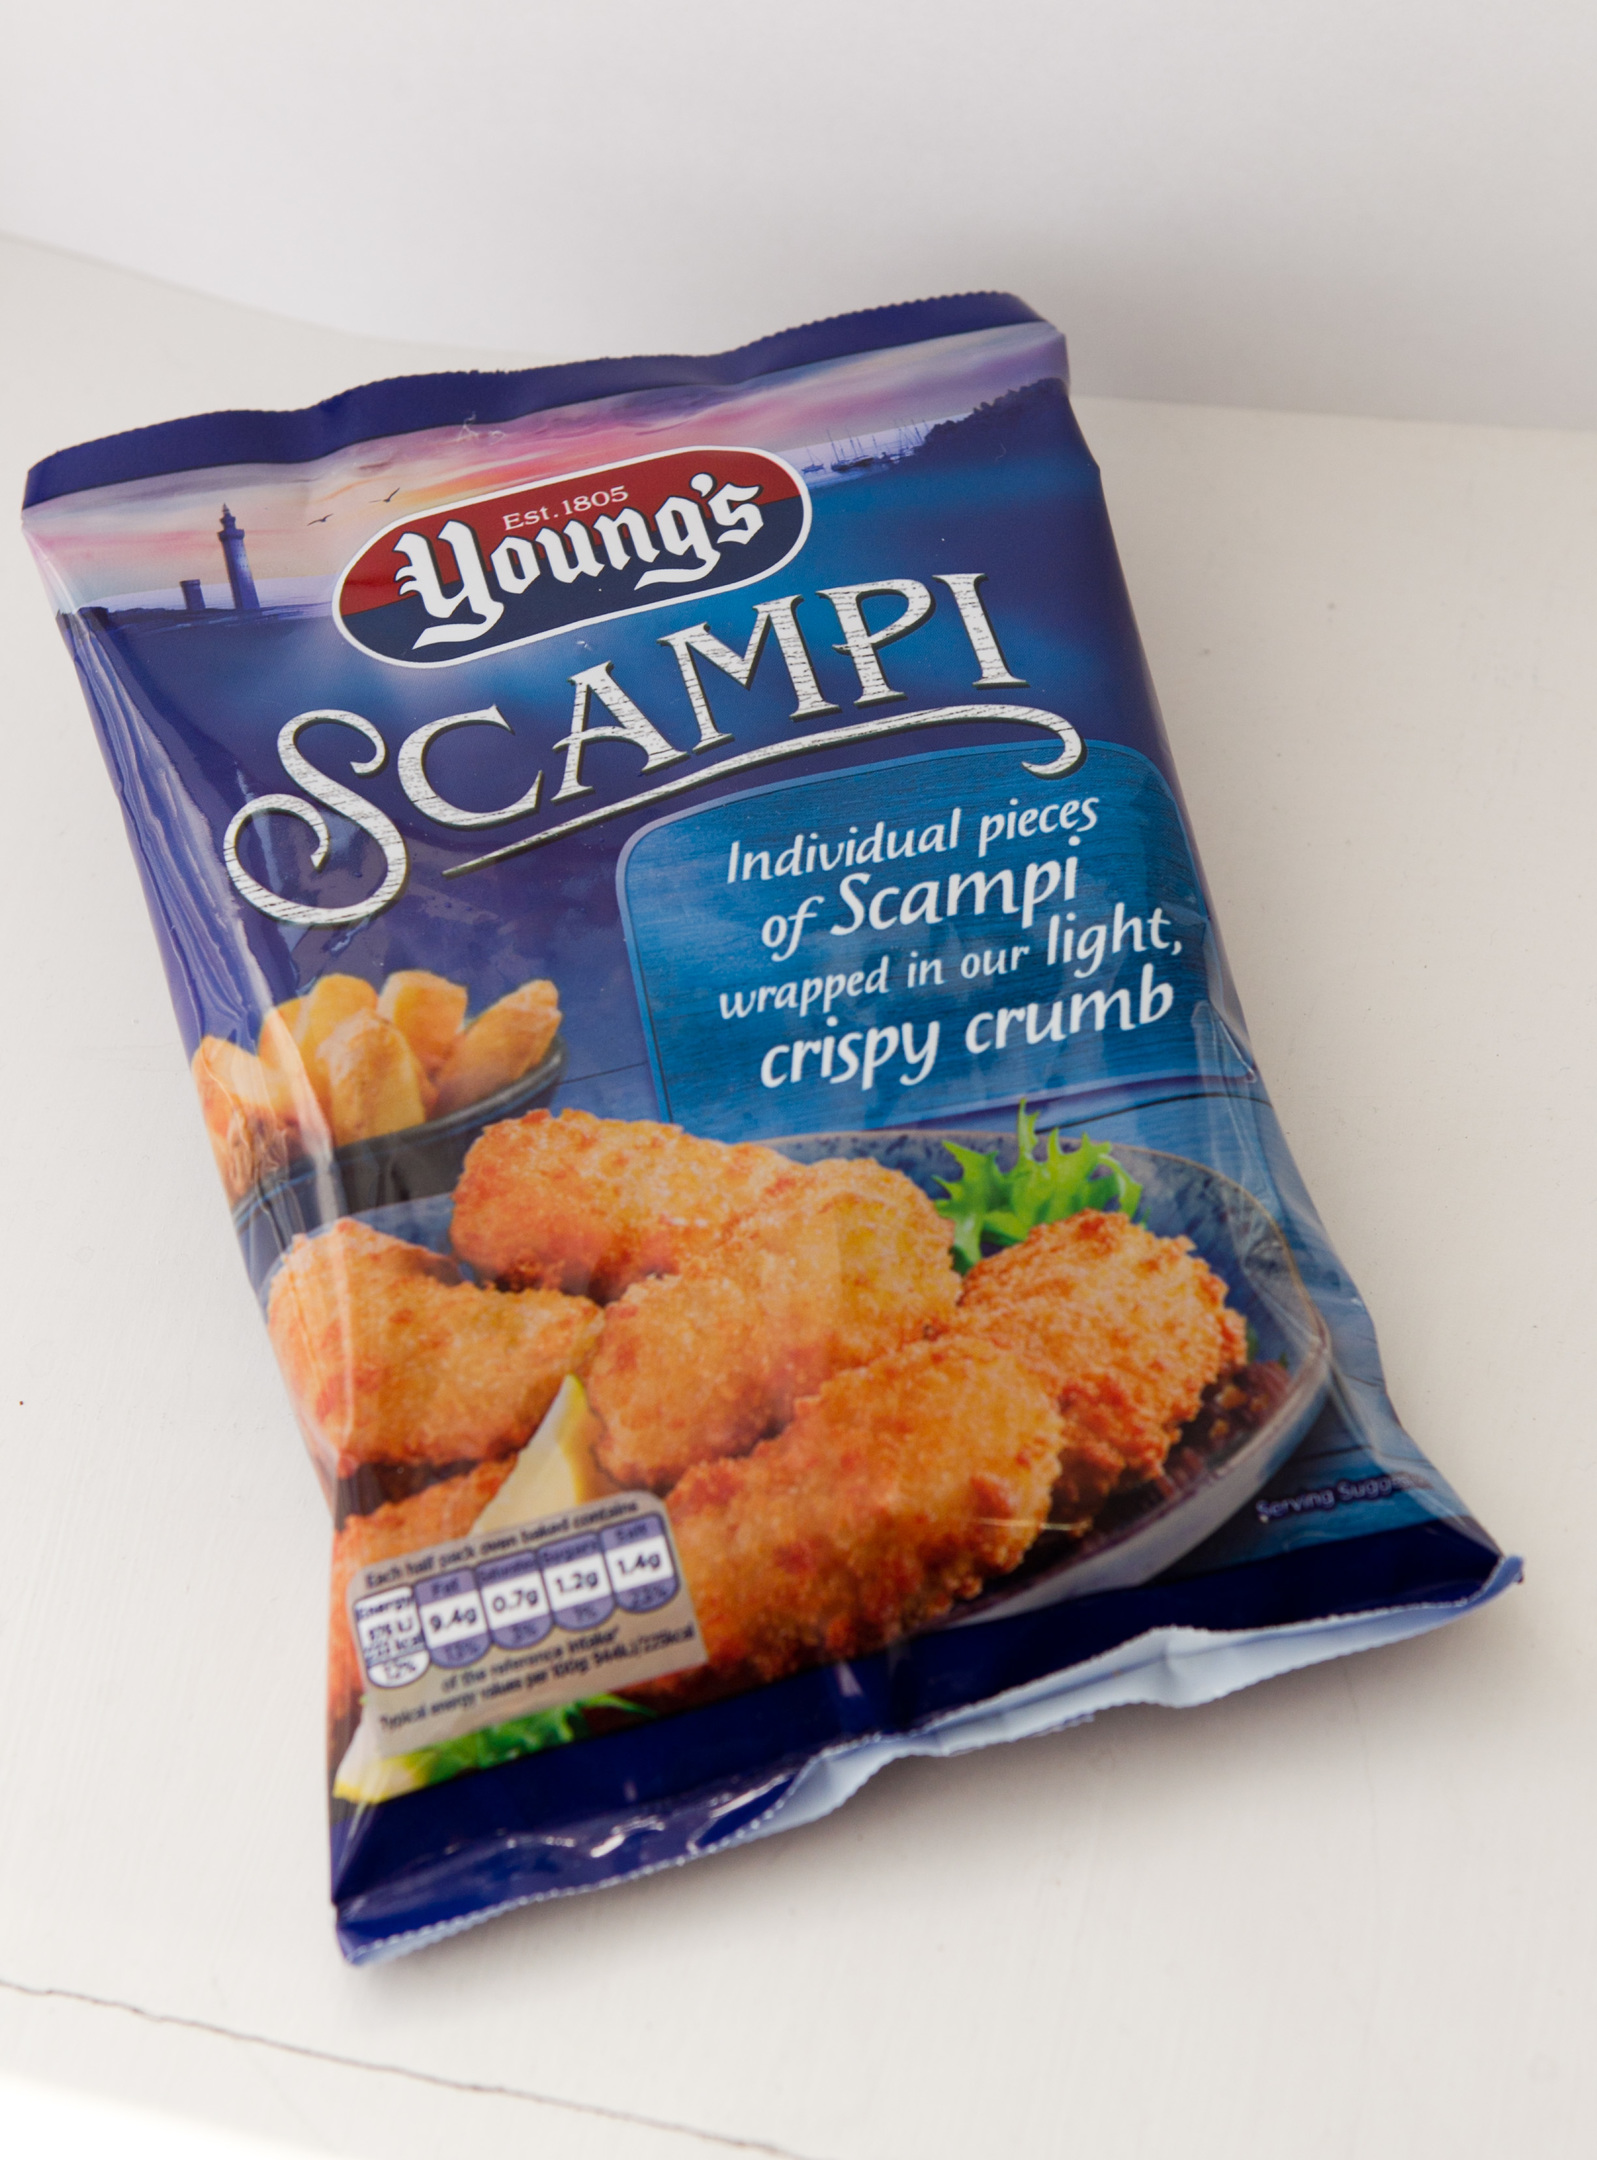 2/6/2016. Sunday Post. Andrew Cawley. Product shots of ready meals: Young's Scampi.